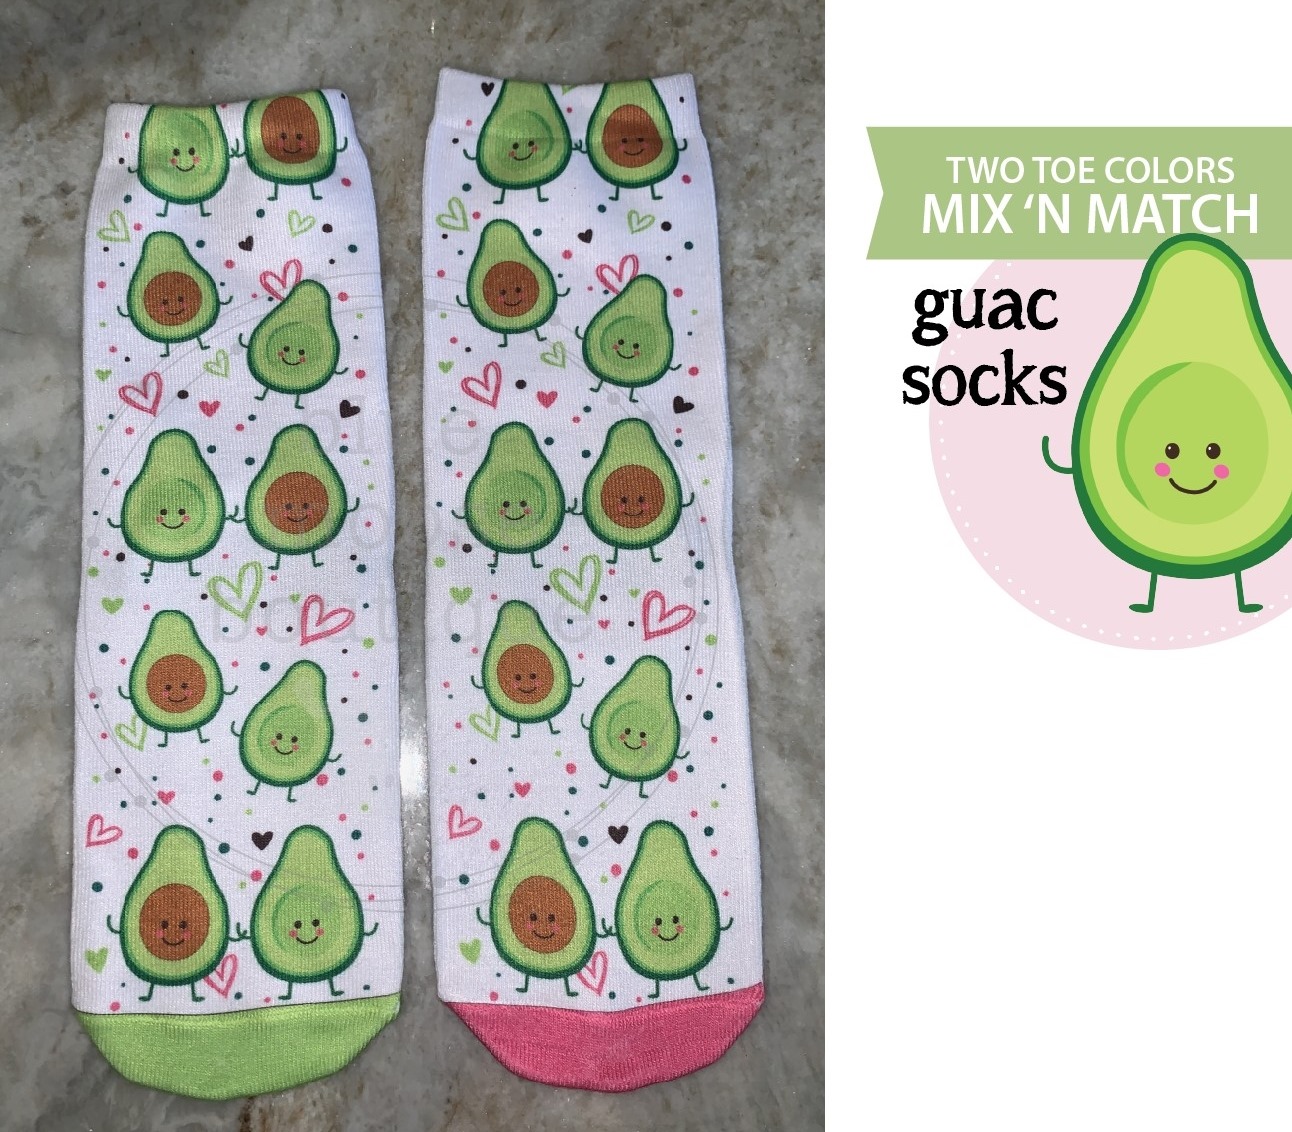 Guac Socks made with sublimation printing